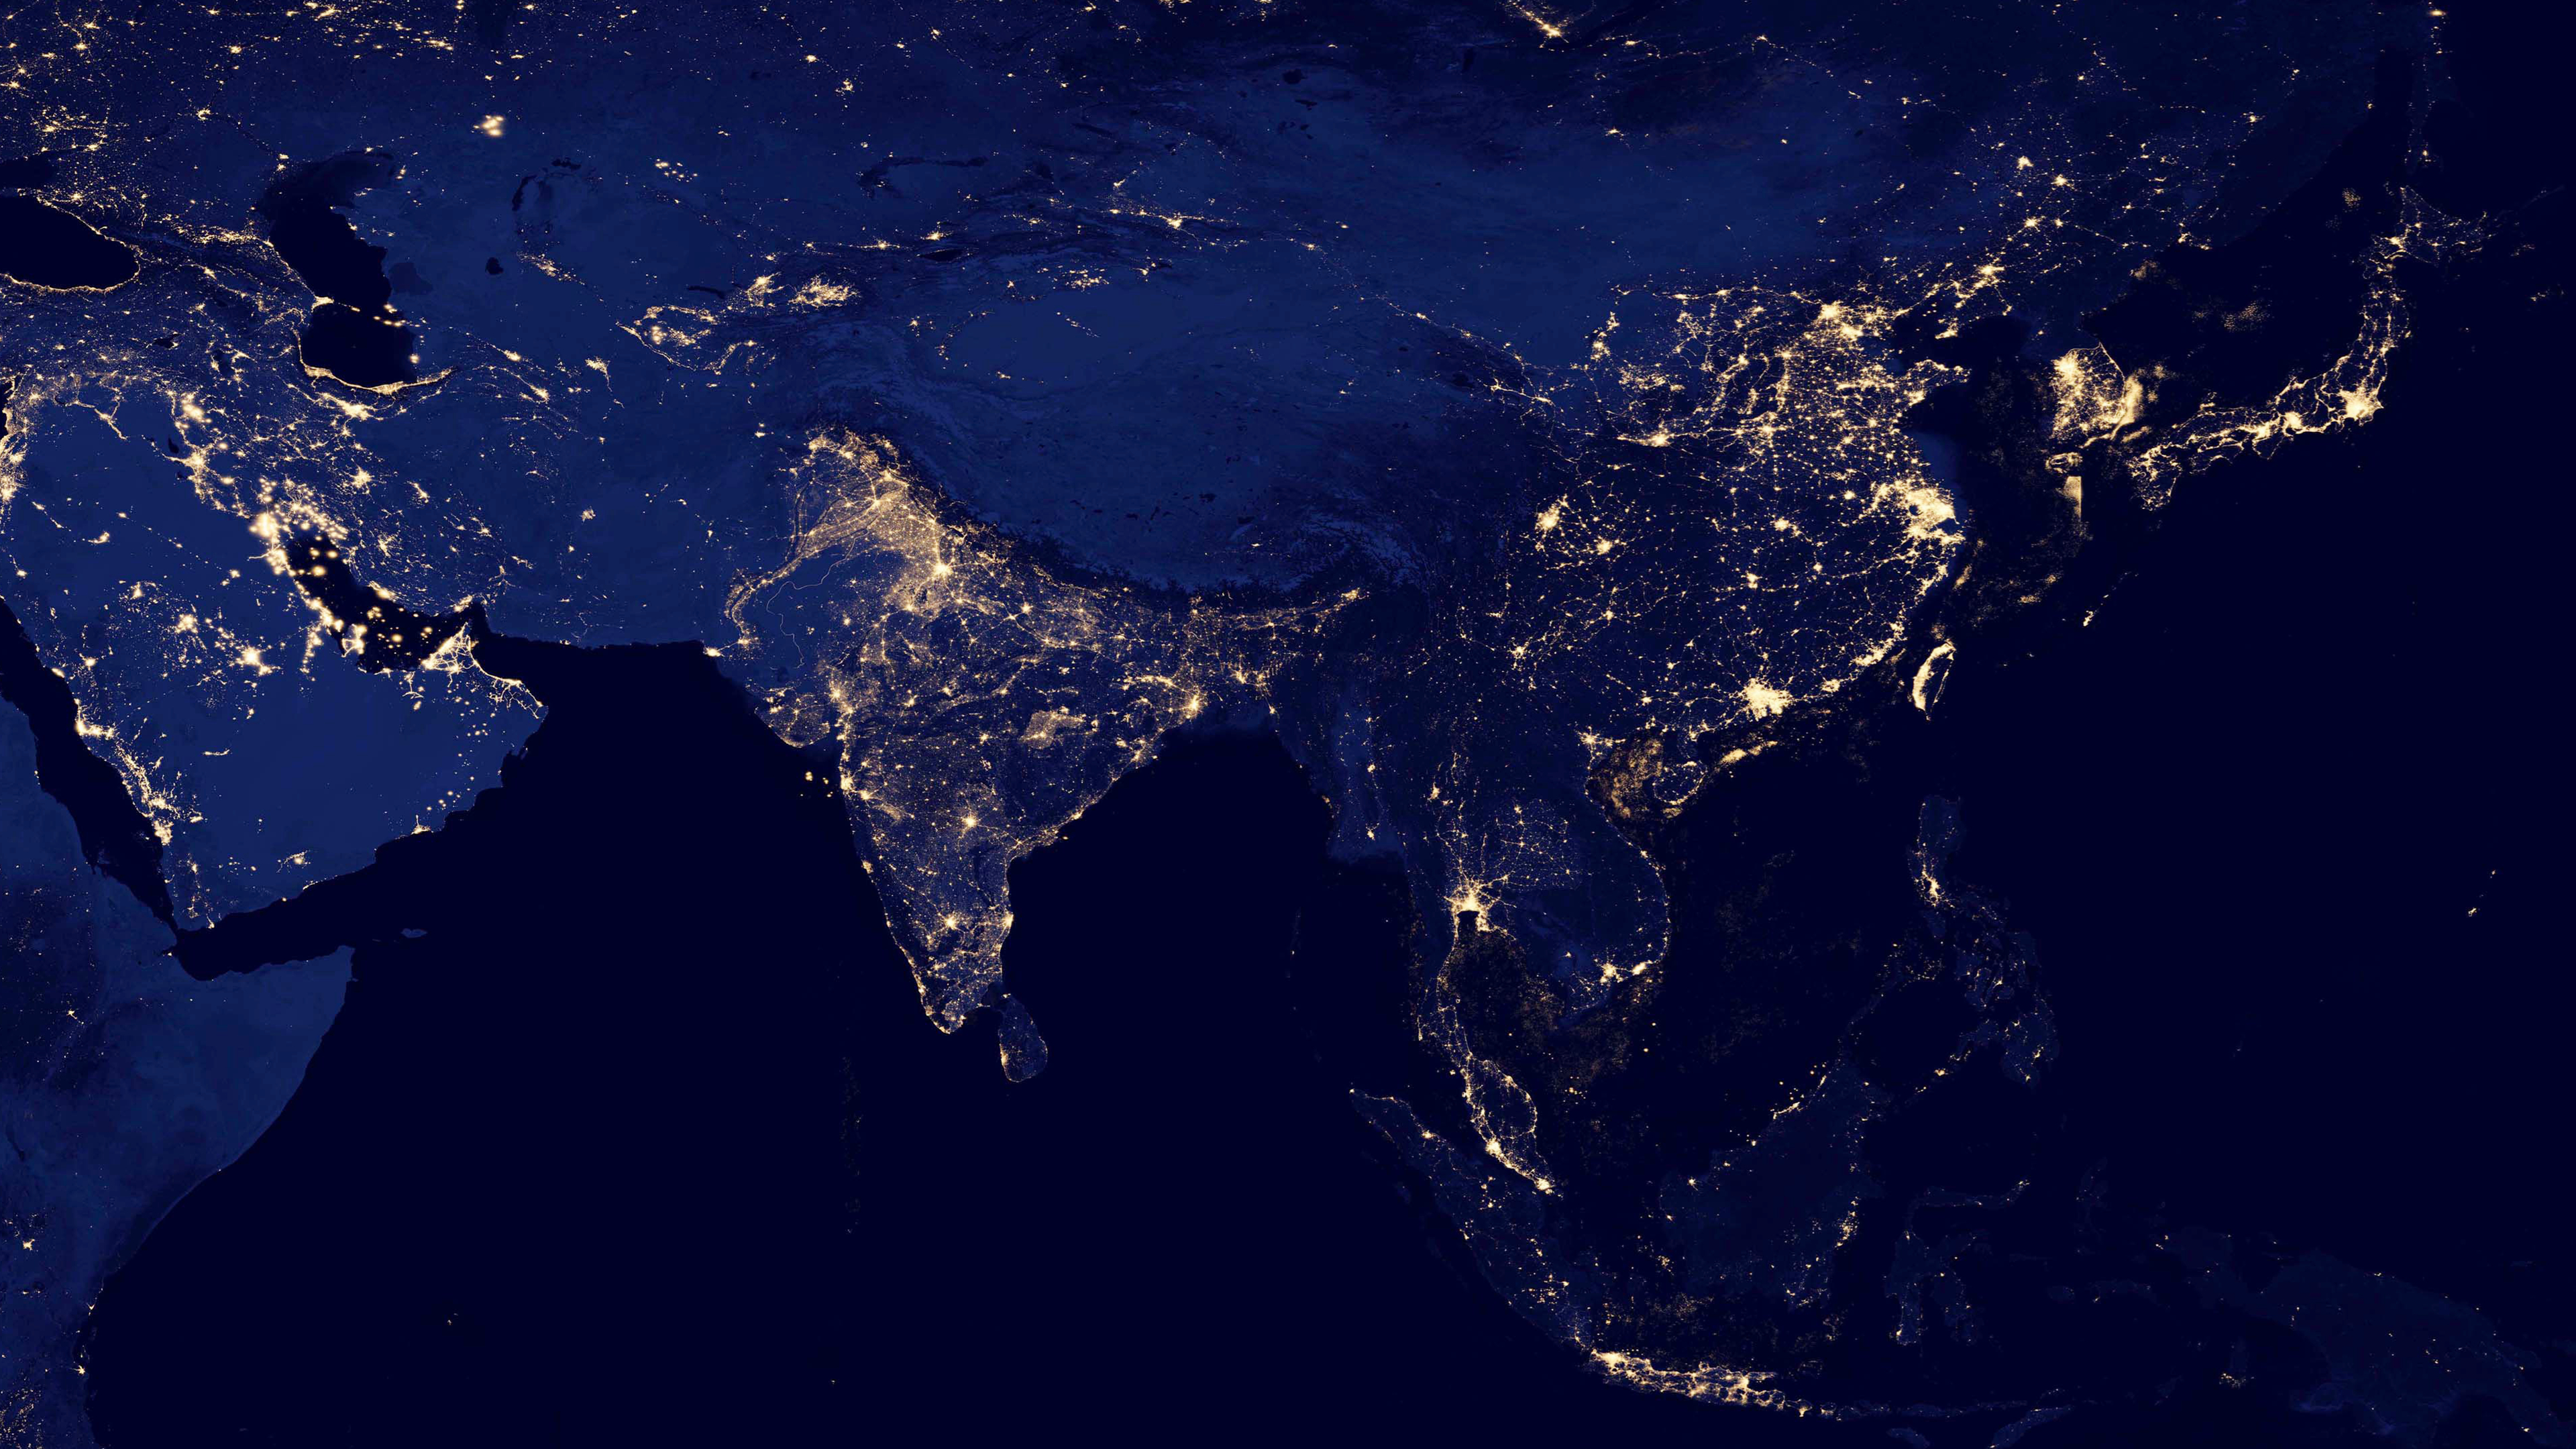 General 3840x2160 city lights night continents world satellite imagery Earth